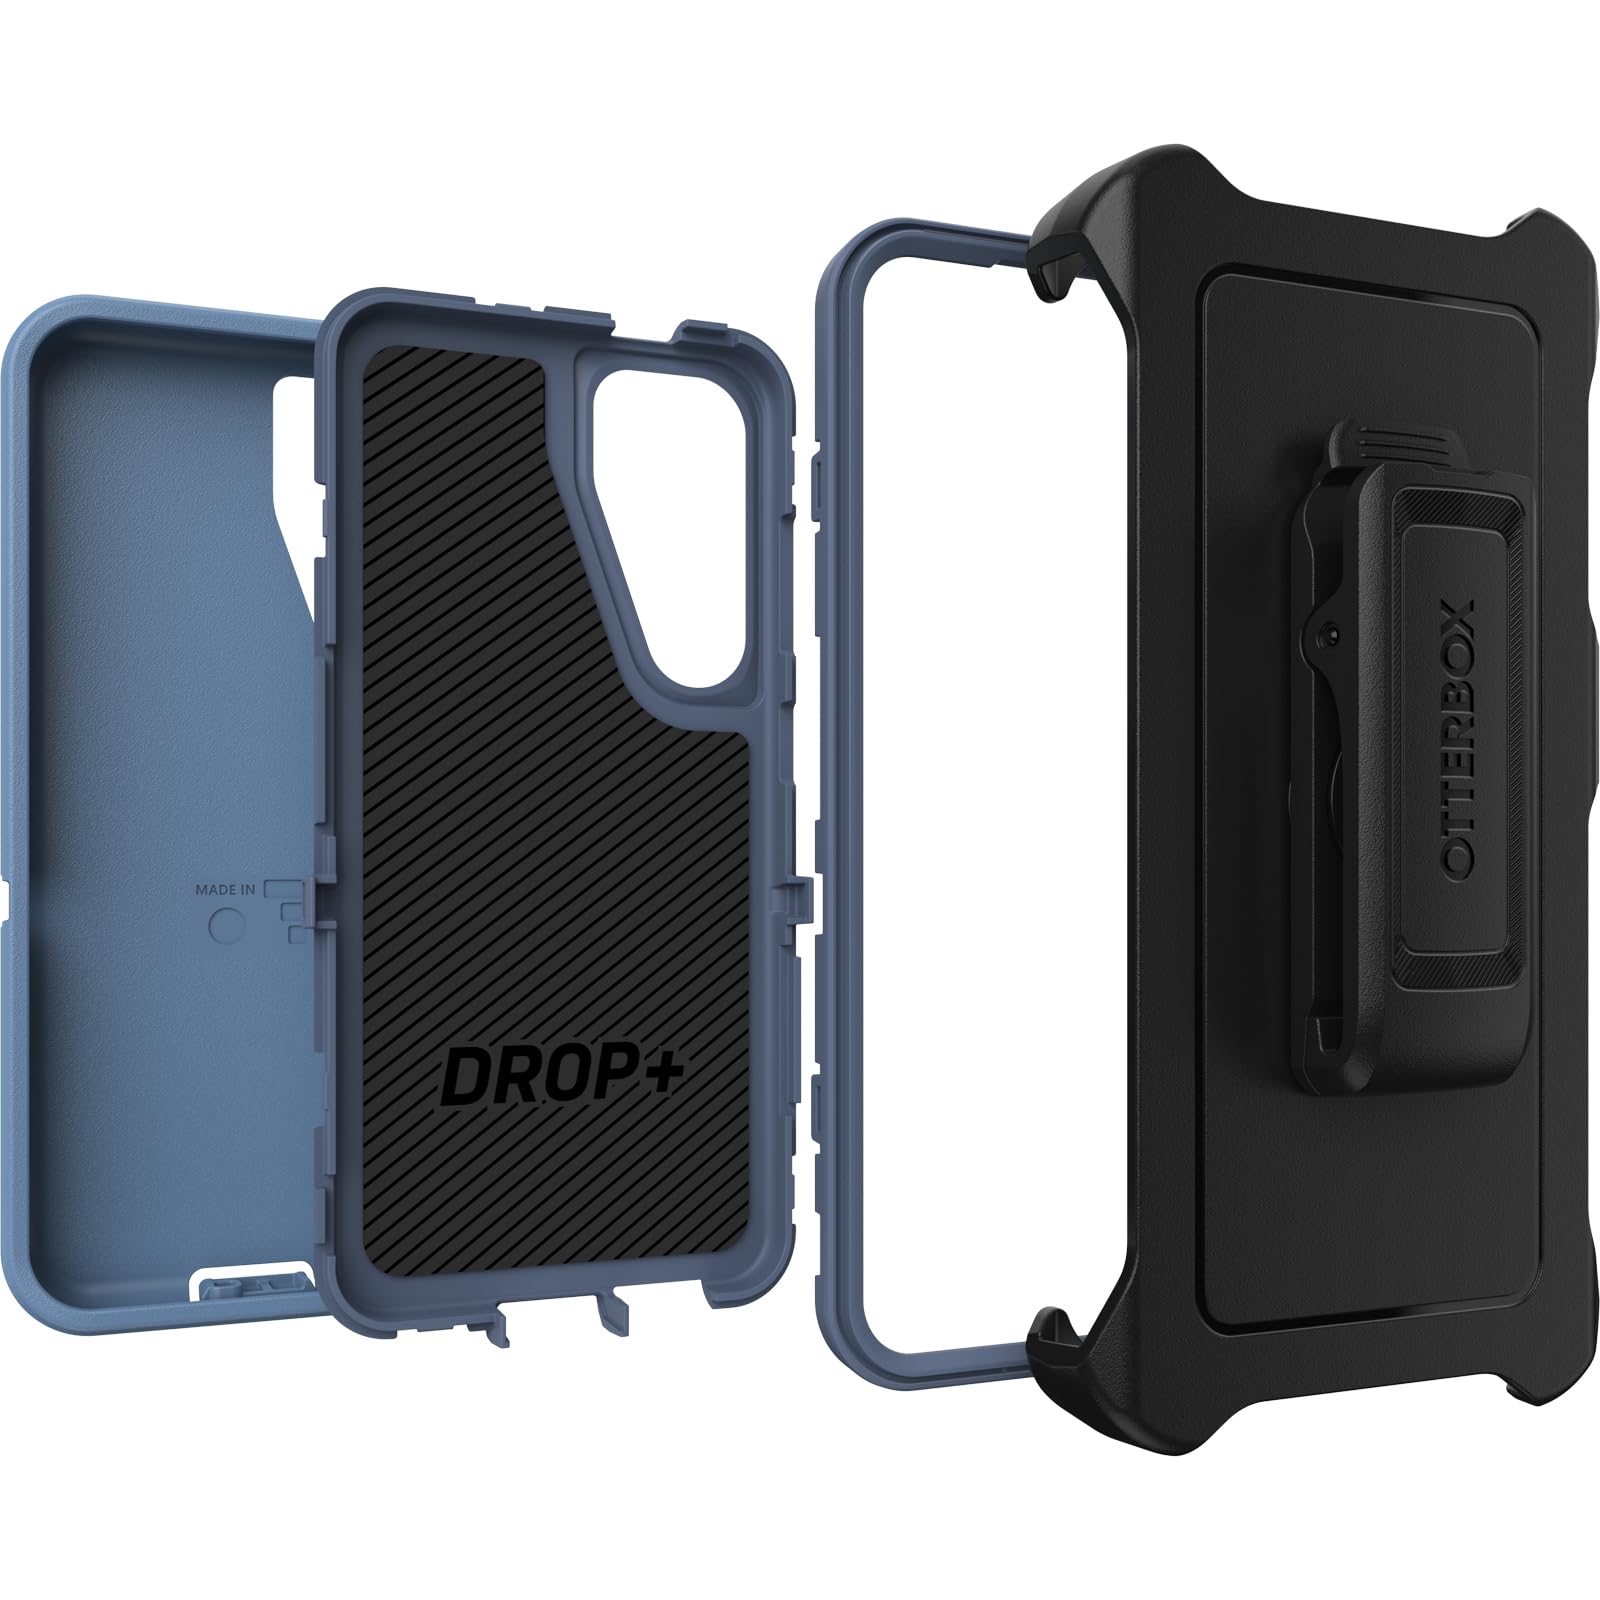 OtterBox Samsung Galaxy S24 Defender Series Case - Baby Blue Jeans, Rugged & Durable, with Port Protection, Includes Holster Clip Kickstand